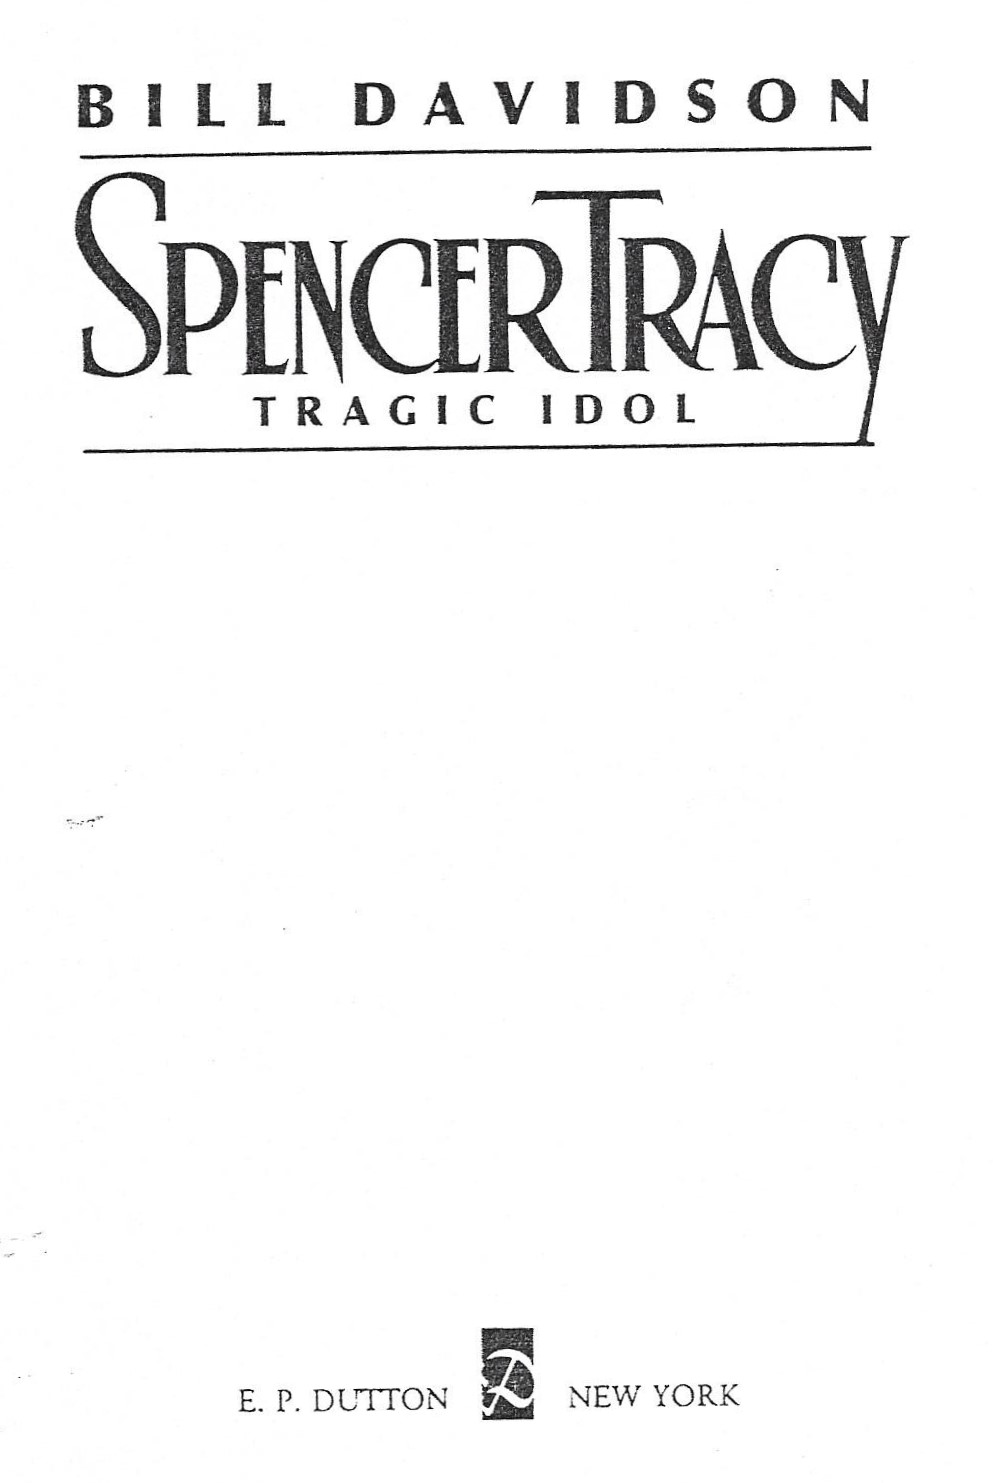  This is copyrighted material.  Davidson’s account of the troubles of the June 1955 filming of Tribute to a Bad Man  is less than gentle. A more sympathetic to Tracy account is given in the “A Granite-like Wedge of a Man” chapter in  Spencer Tracy A 